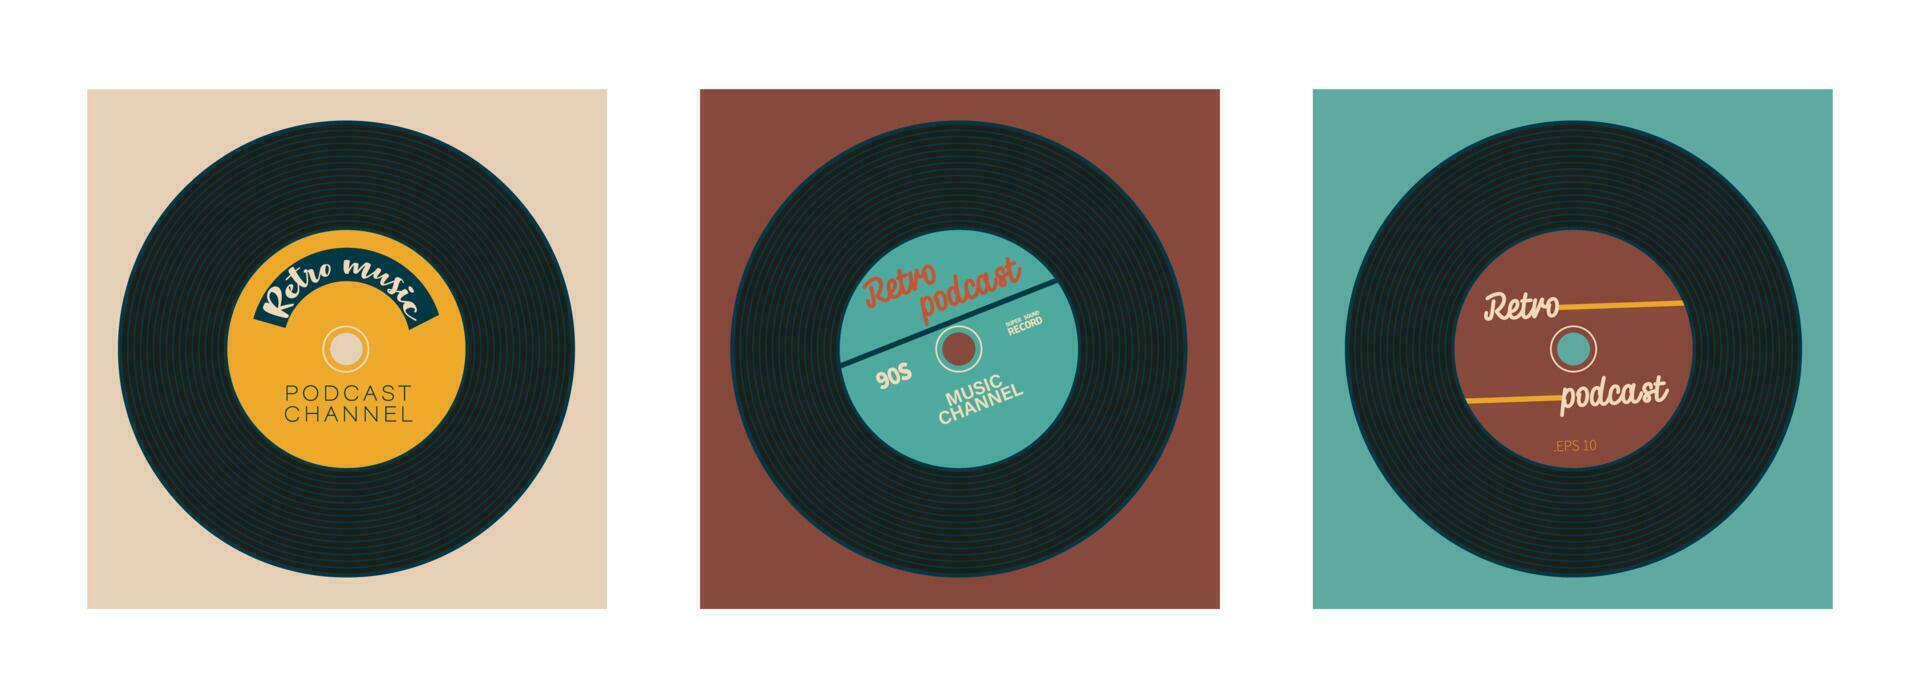 Set of covers for vintage podcast channel. Vinyl record with place for text. Retro style and colors. EPS 10 vector. vector